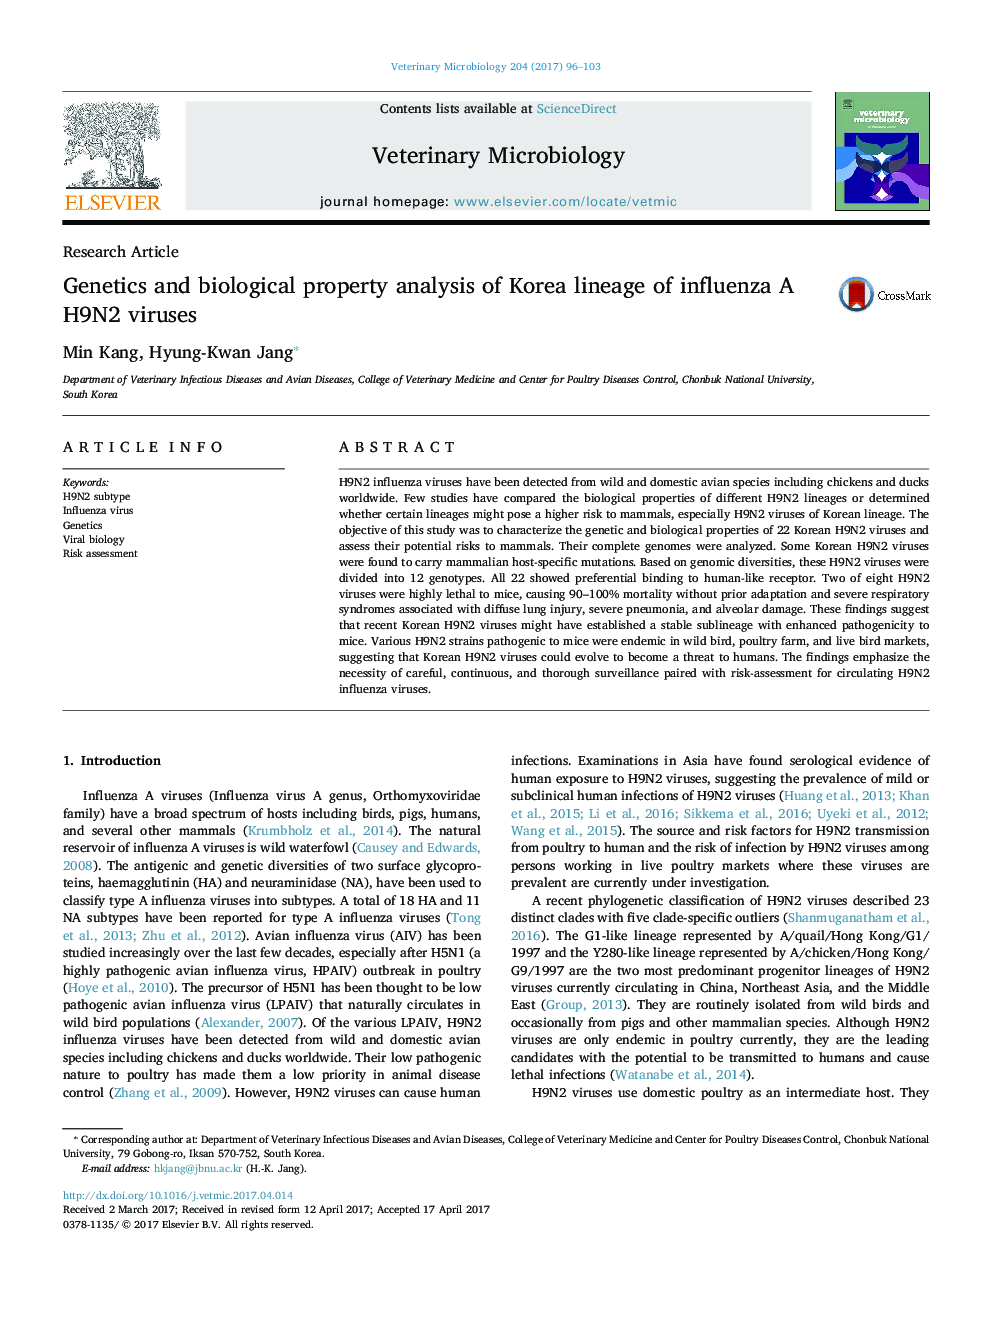 Research ArticleGenetics and biological property analysis of Korea lineage of influenza A H9N2 viruses